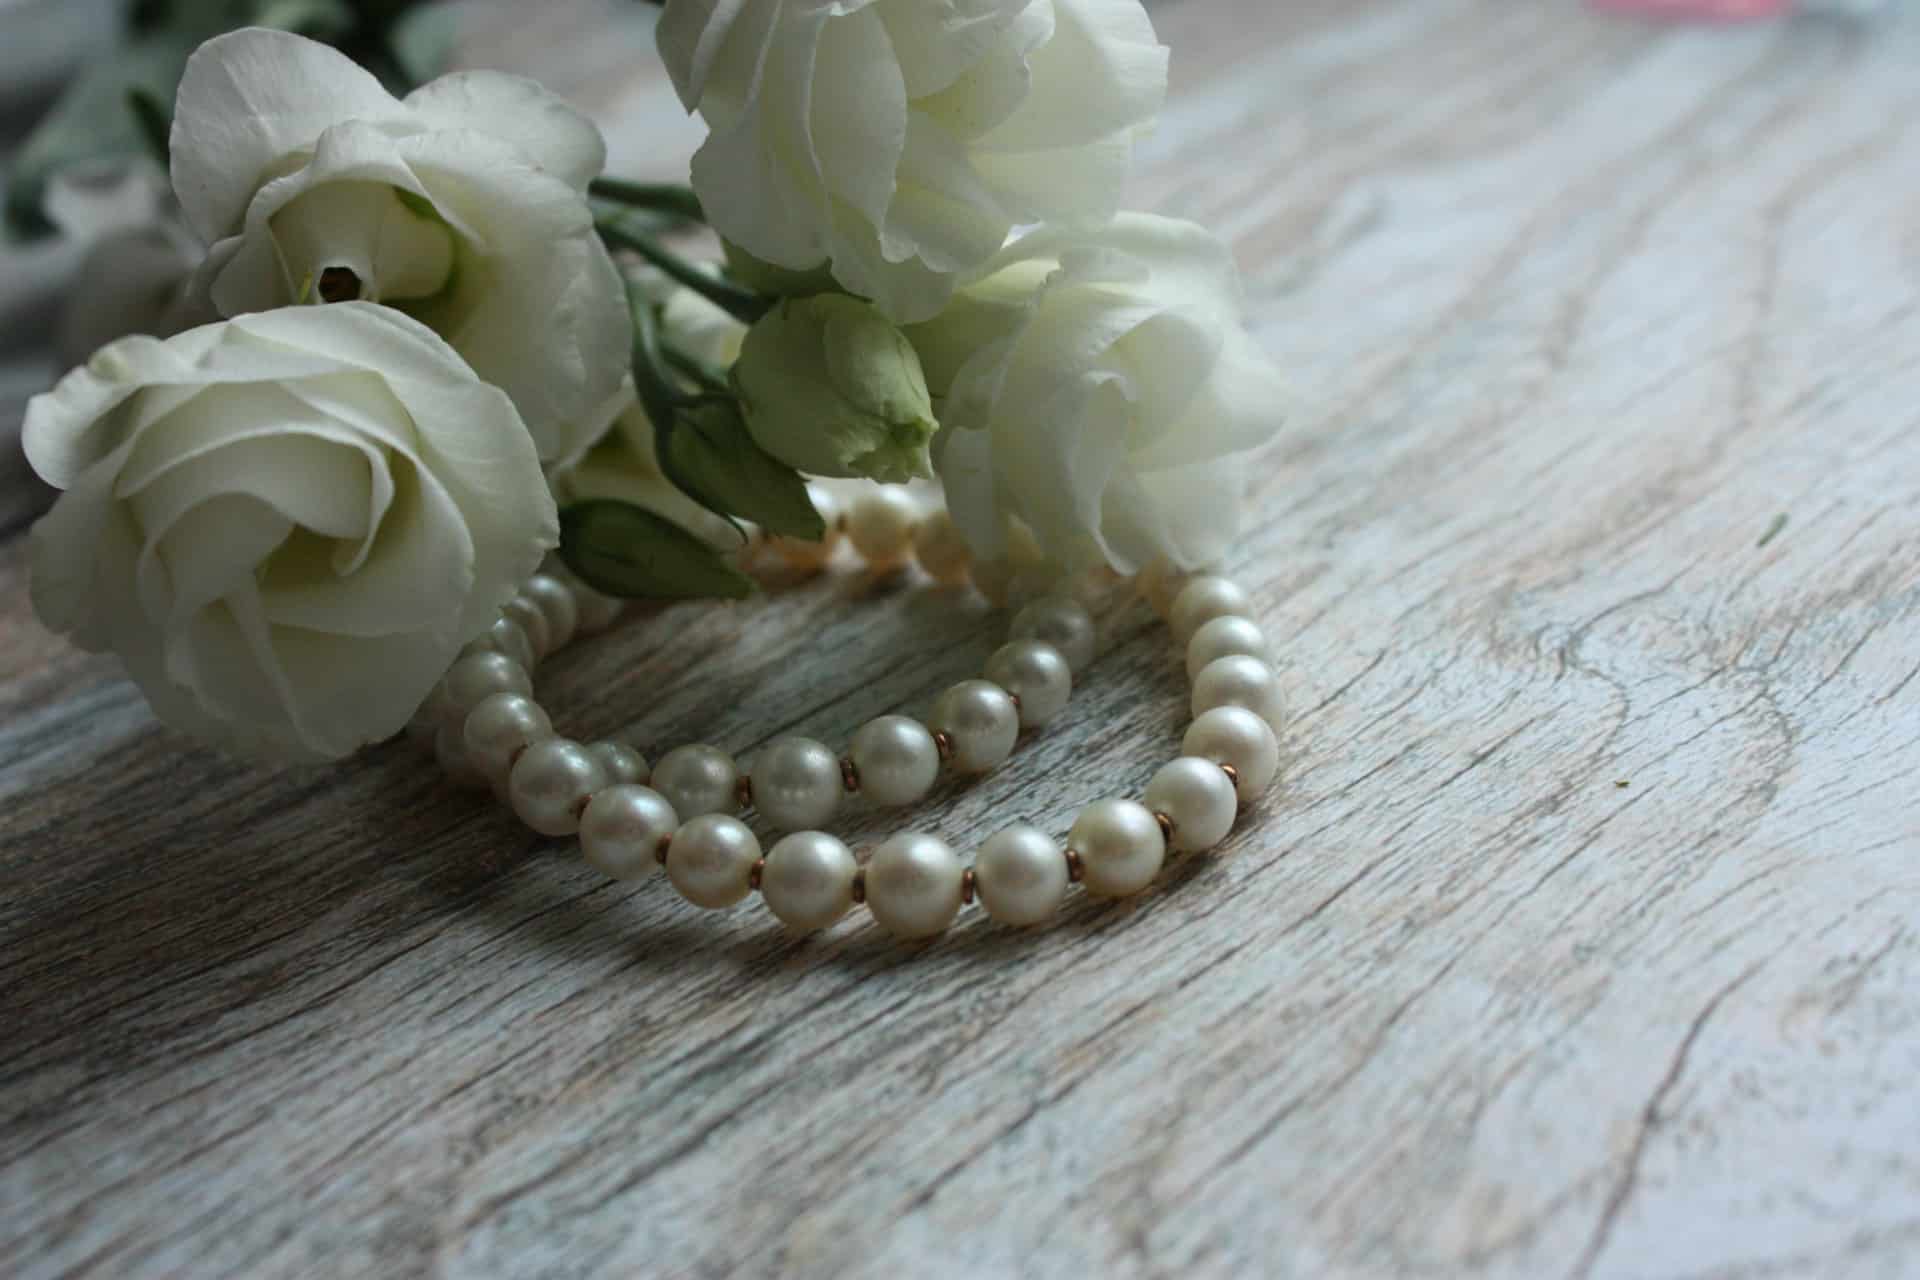 Pearl necklace and white flowers